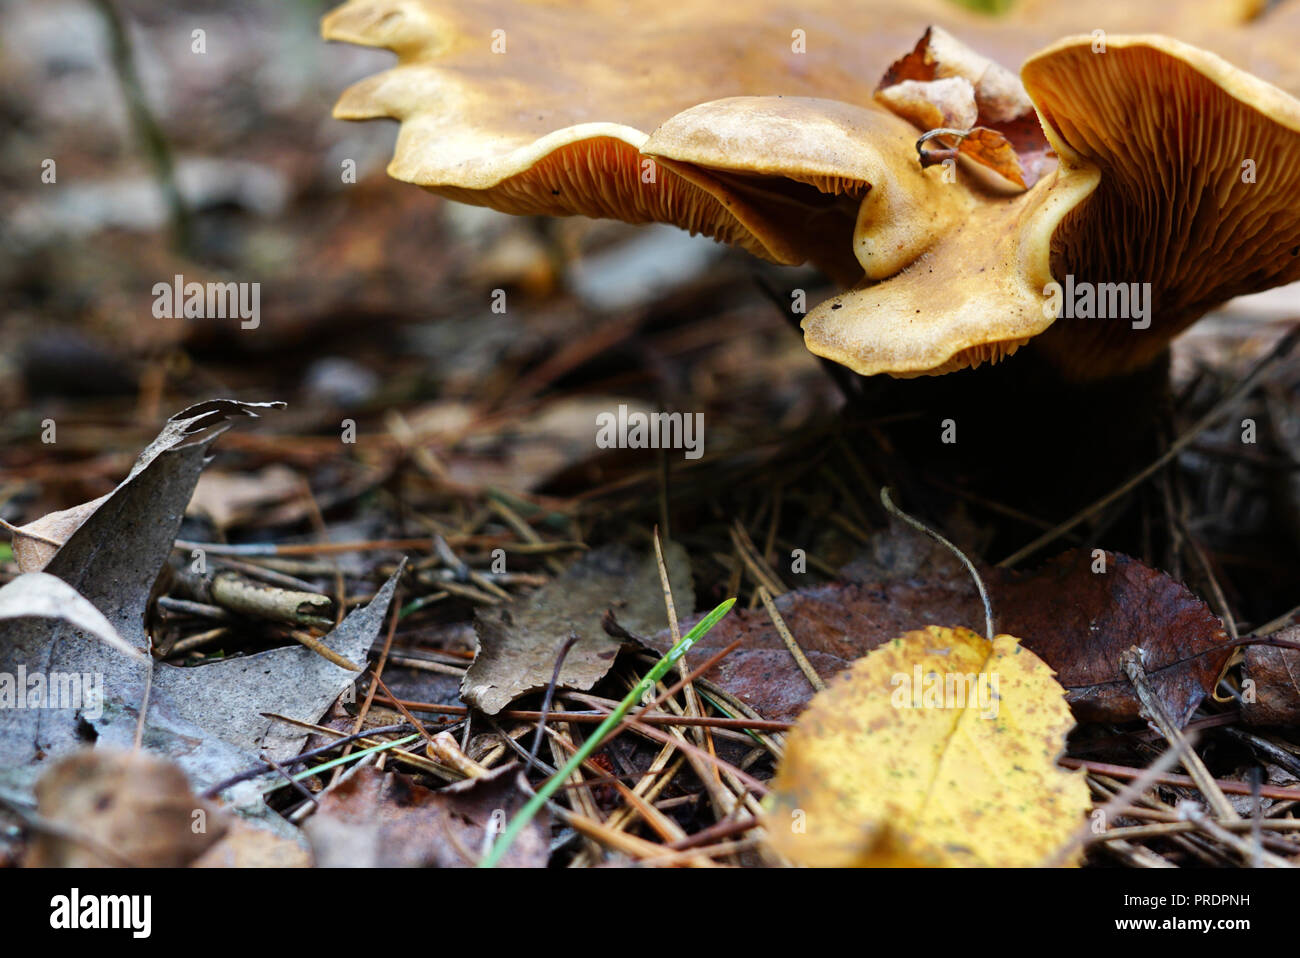 The cap of the Large undulating mushroom is yellow. The fungus grows in the forest surrounded by foliage and spruce needles. Name of mushroom oyster m Stock Photo